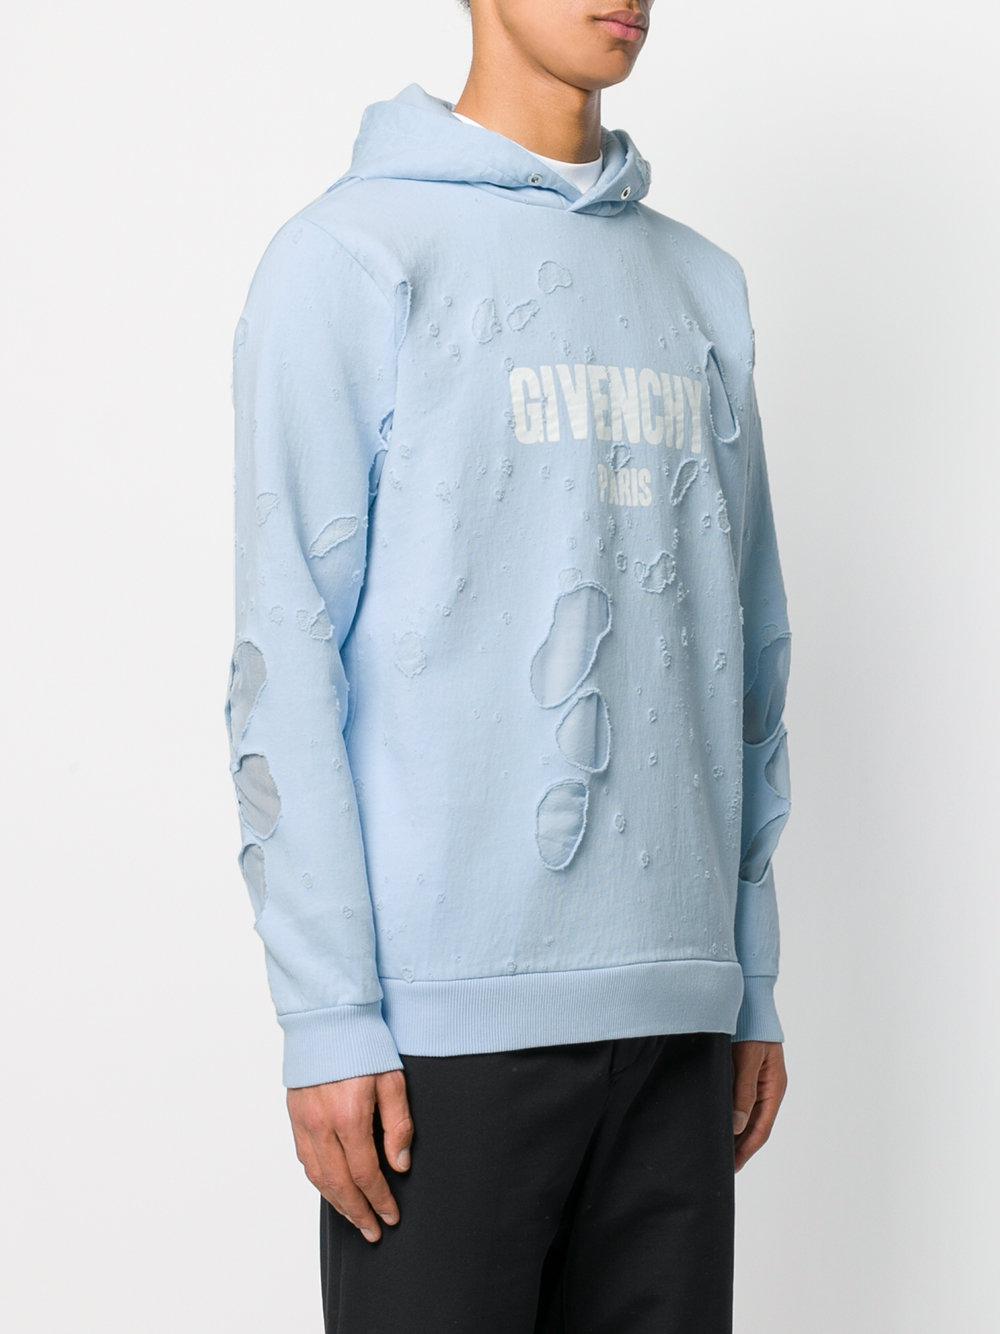 Givenchy Leather Distressed Hoodie in Blue for Men - Lyst